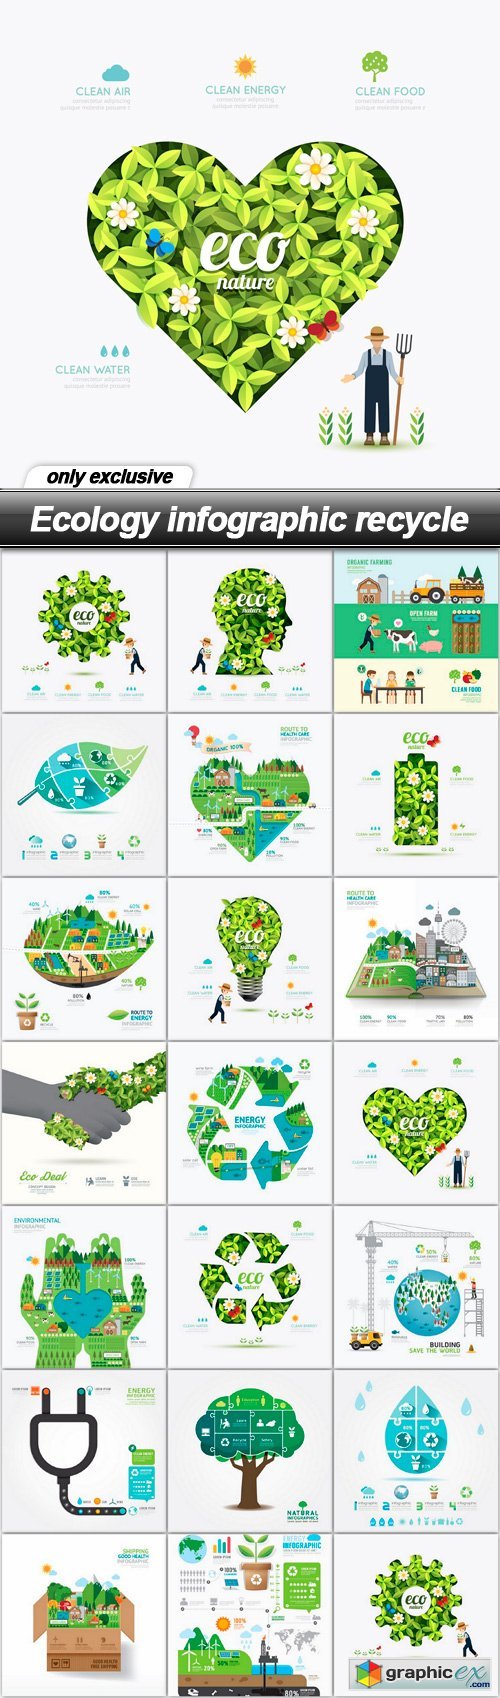 Ecology infographic recycle - 20 EPS